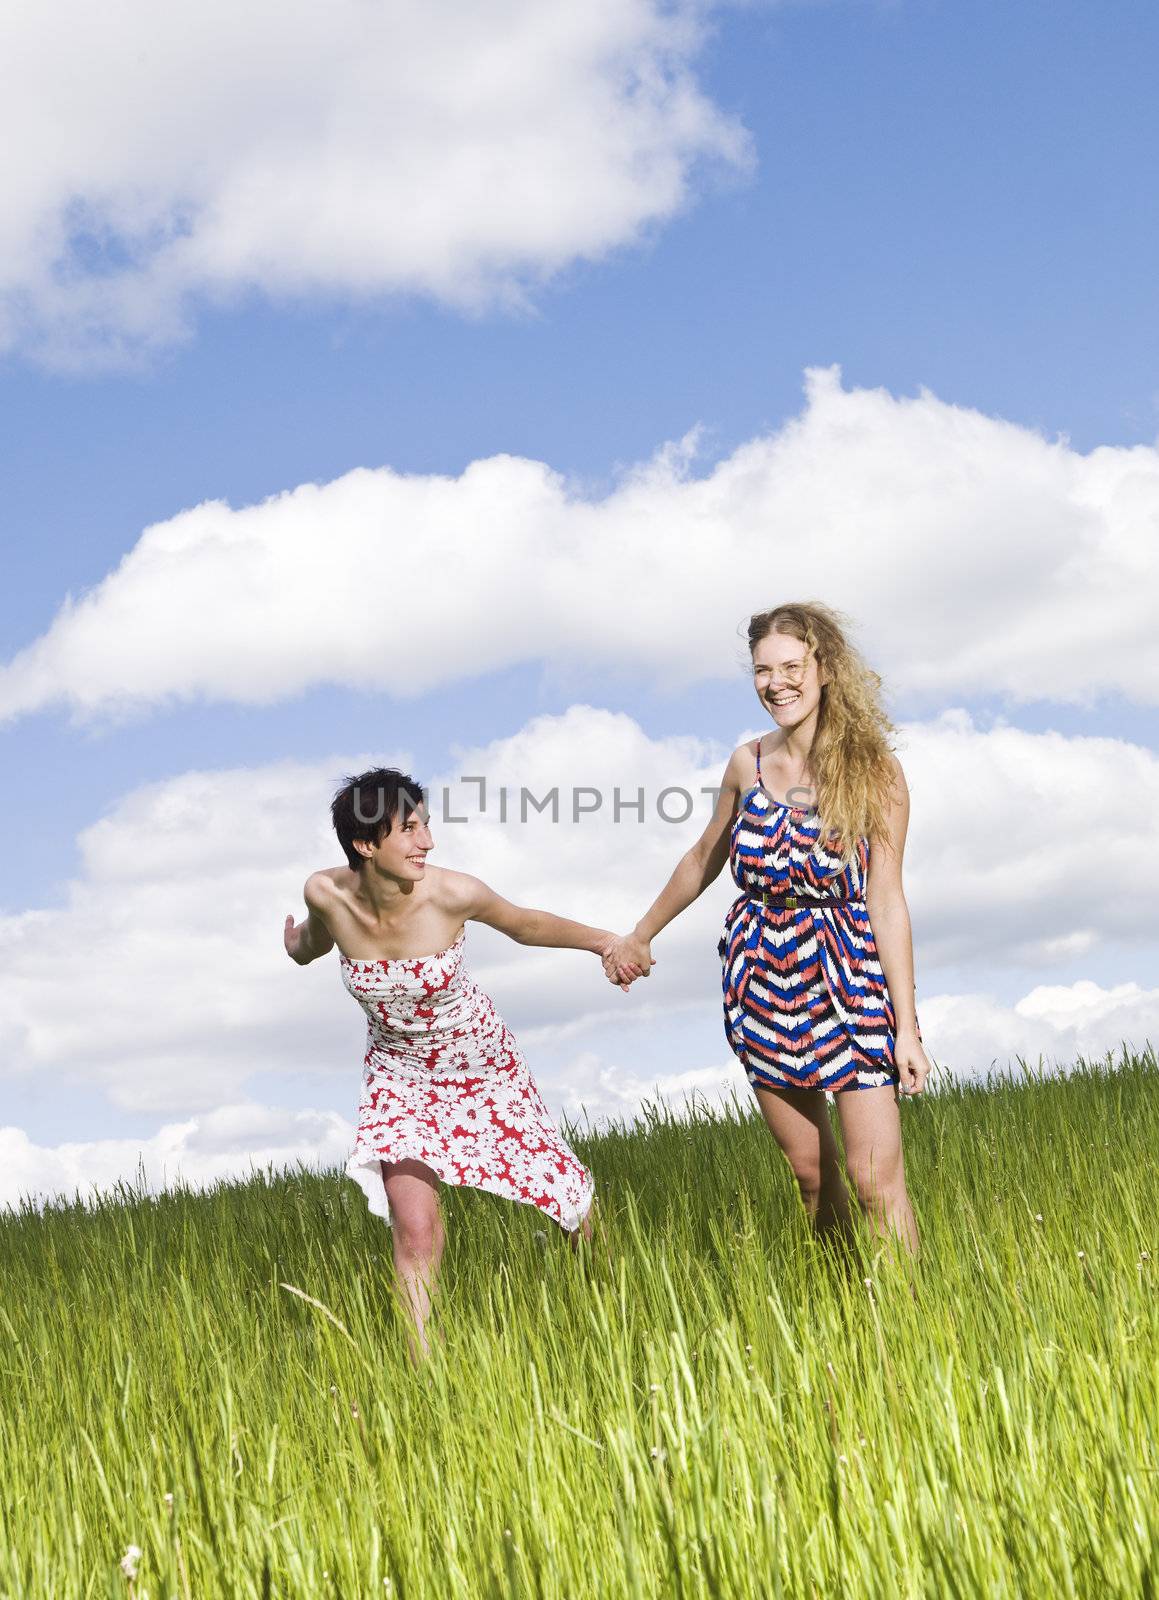 Two women holding hands on a field